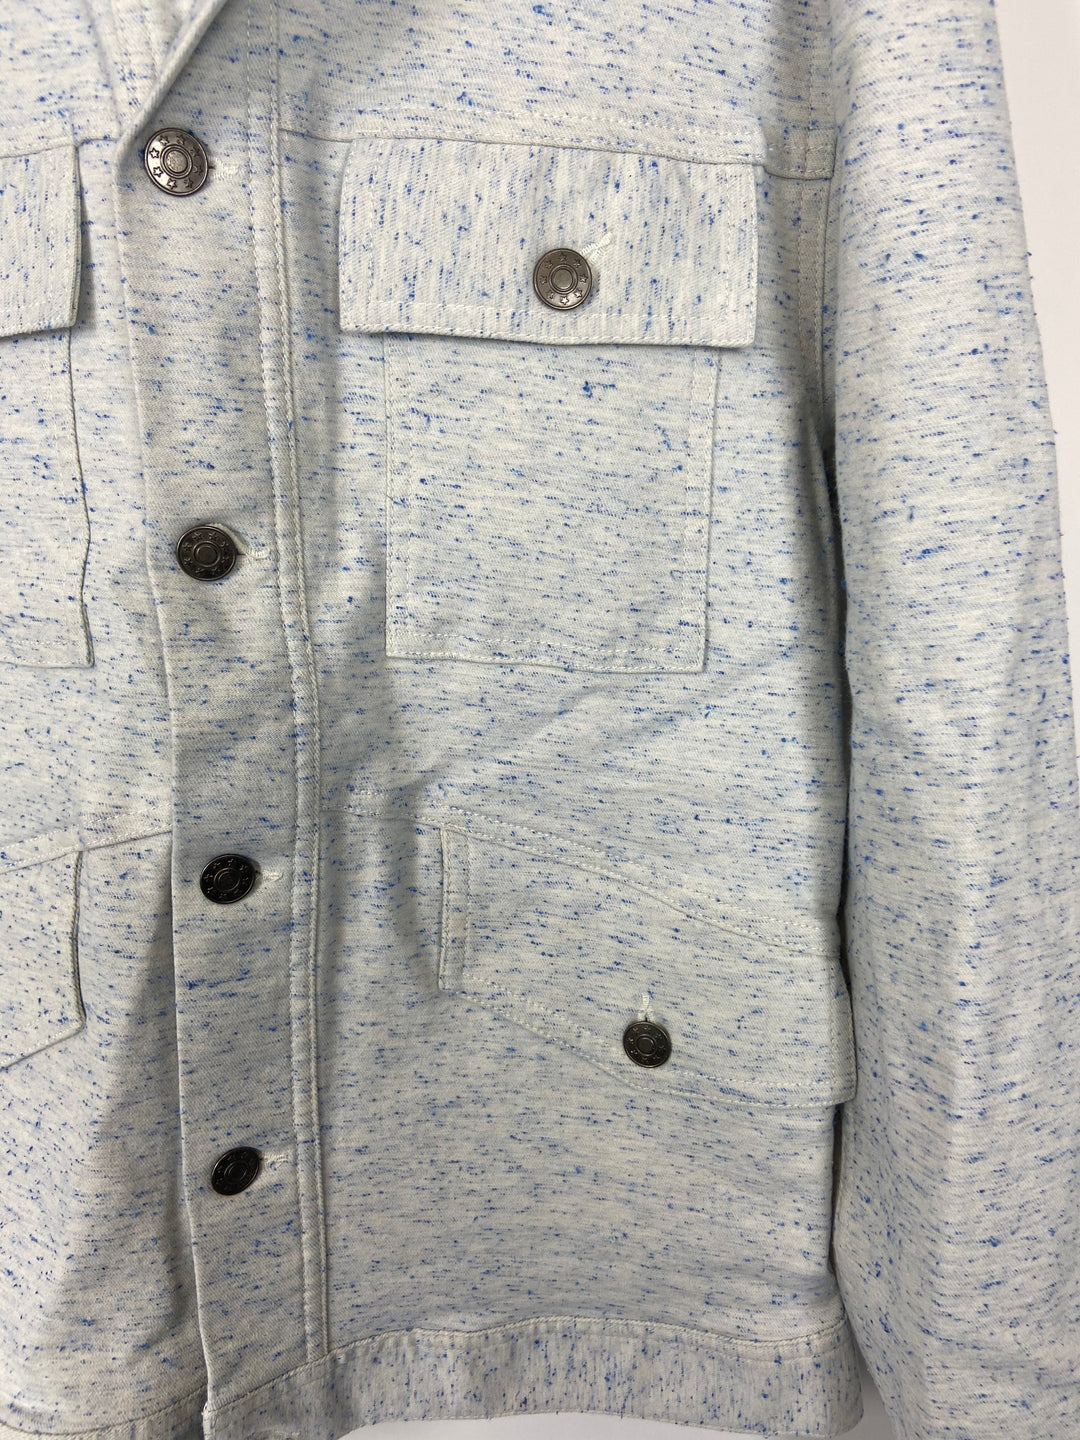 Button Up Blue and White Jacket - Small